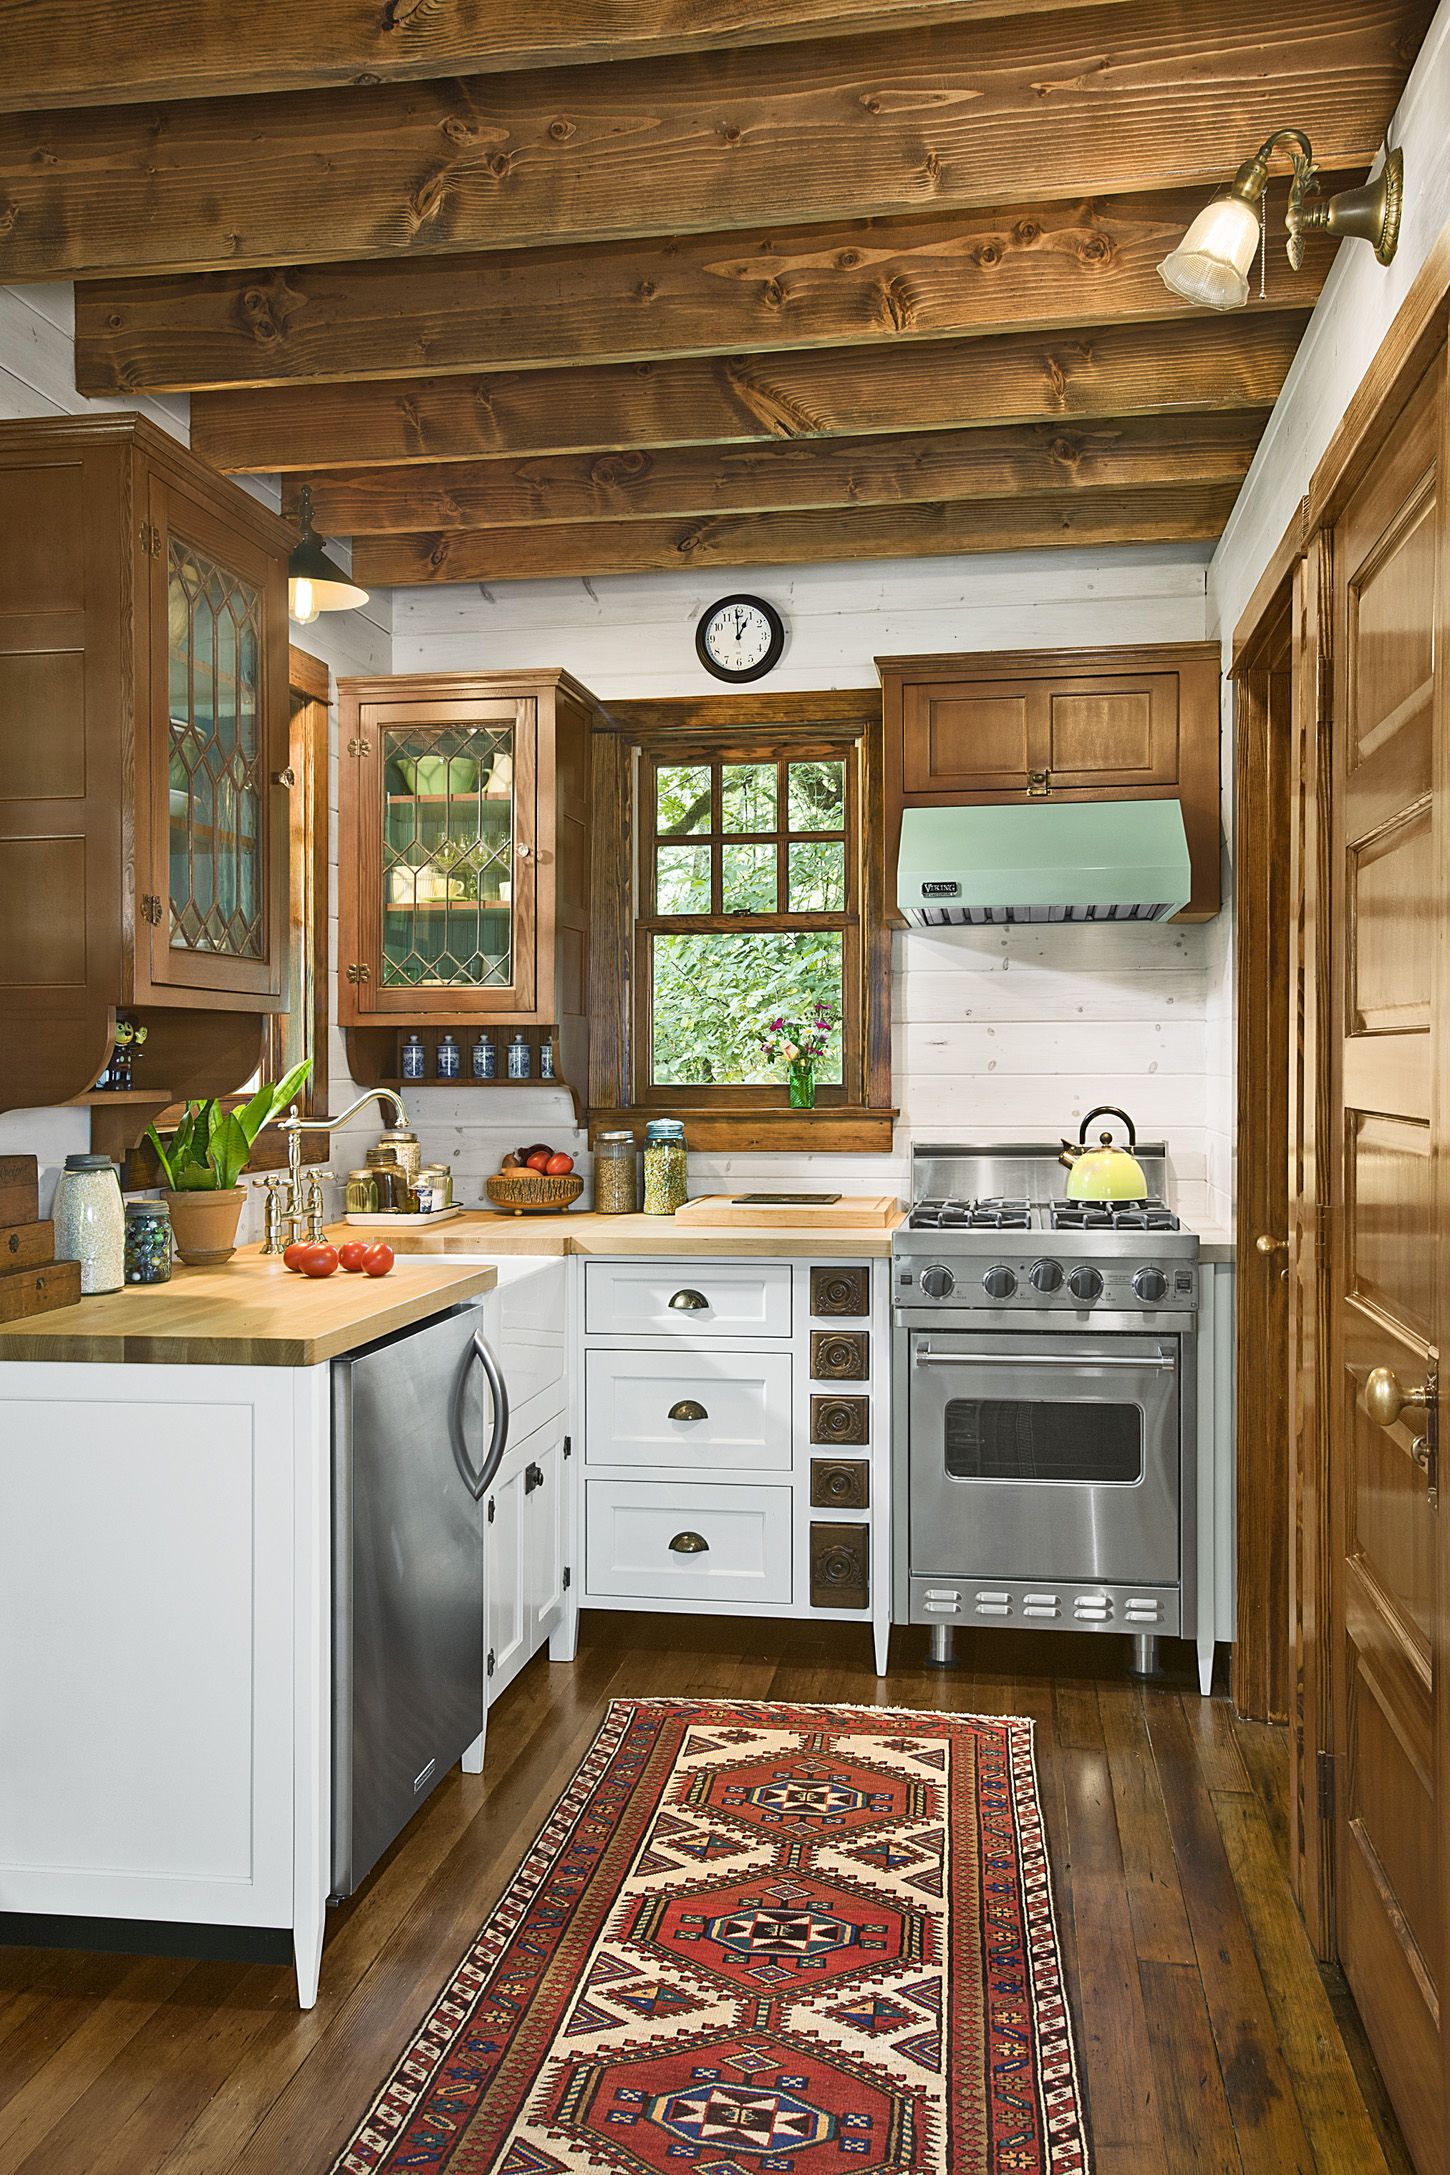 If you have a tiny kitchen, this is a great idea for a making the most out of it with this country farmhouse design.